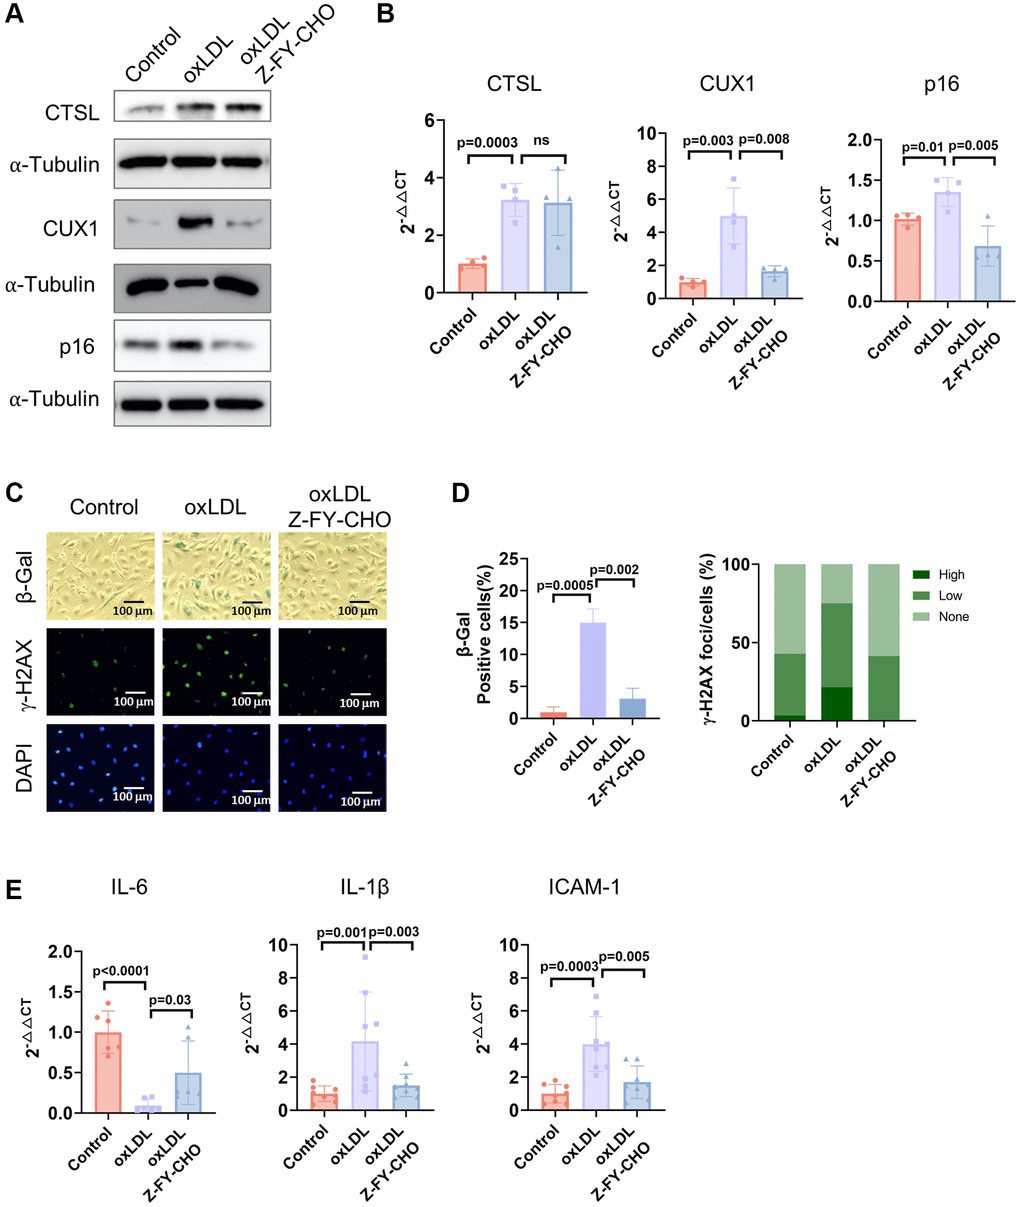 CTSL is an upstream regulator of CUX1 and p16INK4a, inducing oxLDL-induced senescence. (A, B) Western blot and qPCR analyses show that oxLDL-induced activation of CTSL induces CUX1 and p16INK4a expression, which can be reversed by treating the cells with Z-FY-CHO. (C–E) SA-β-gal and γ-H2AX staining and the expression of the SASP genes IL6, IL-1β, and ICAM-1 verify that oxLDL-induced activation of CTSL induces cellular senescence, which can also be reversed by treating the cells with Z-FY-CHO. Quantitative plots for both β-gal+ cells (%) in SA-β-gal staining and γ-H2AX foci/cells (%) with γ-H2AX staining were shown on the right side of the panel D. DAPI staining visualizes the presence of nuclei as a control for the cells in this analysis. Data for Western blots represent three biologically independent samples (n = 3). Data for qPCR represent a combination of three (n = 3) biologically independent experiments. Data for both SA-β-gal staining and γ-H2AX staining represent three biologically independent samples (n = 3).